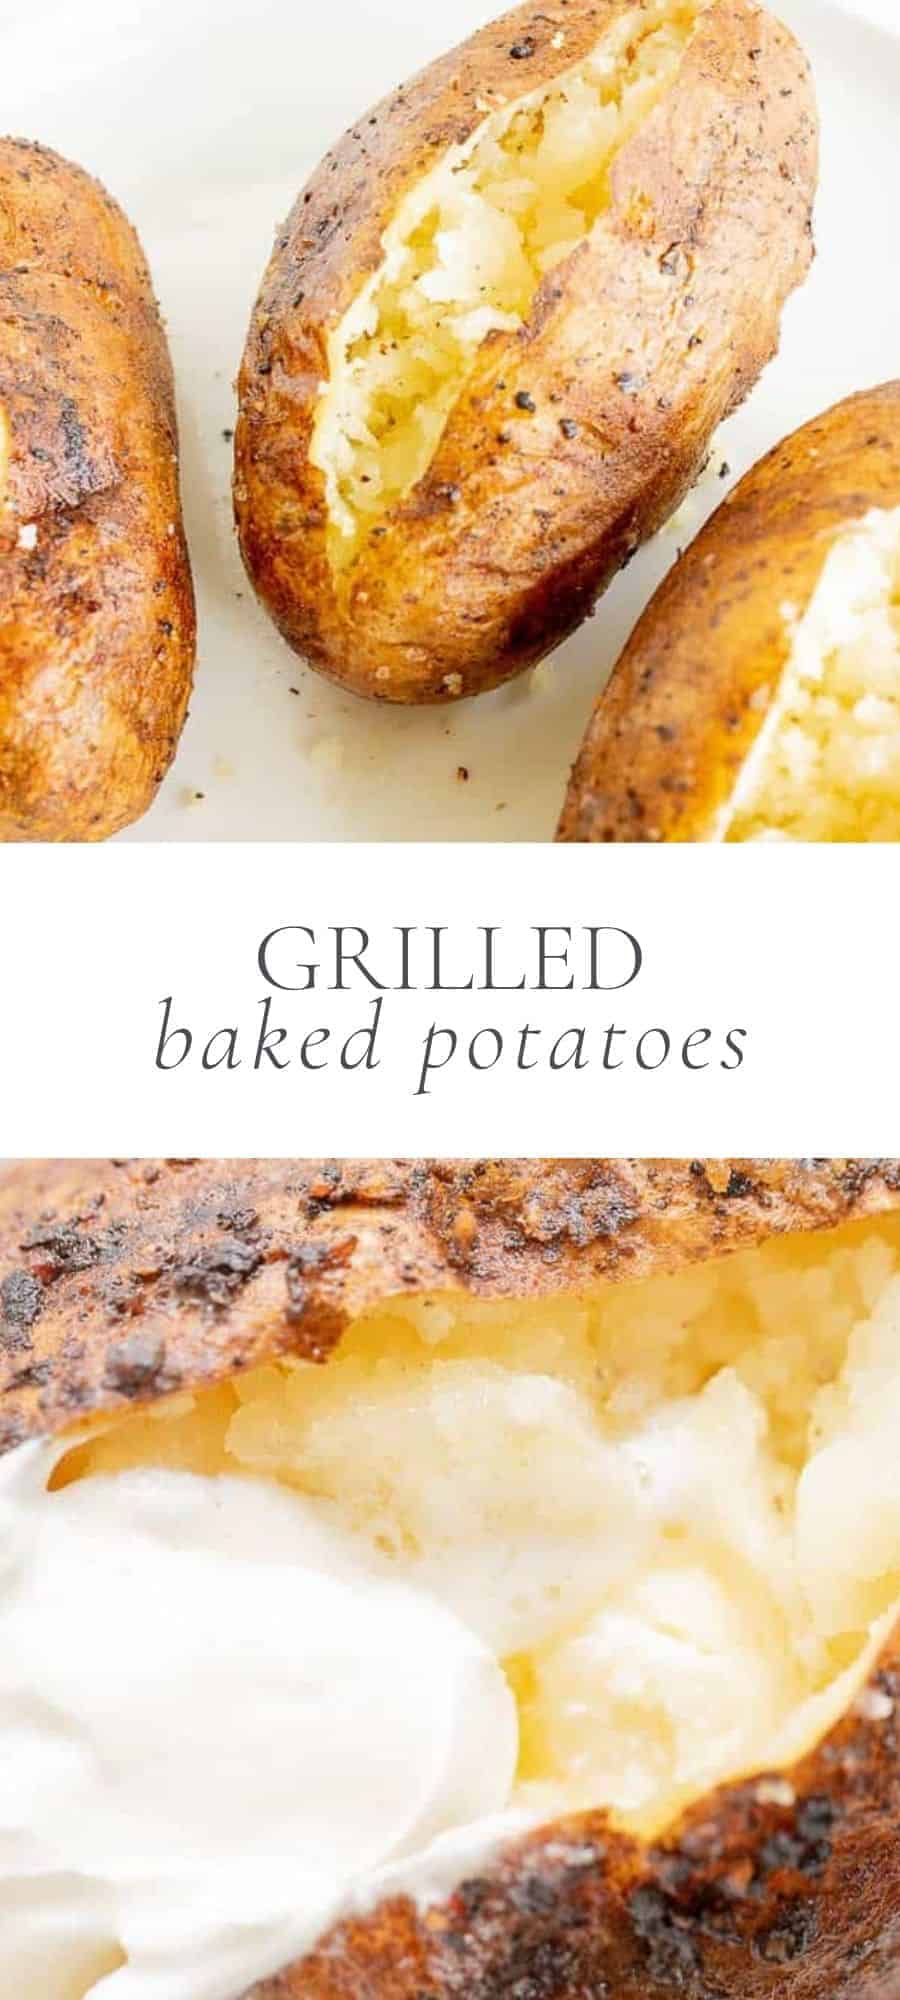 grilled baked potatoes on countertop, overlay text, close up of grilled potato with butter